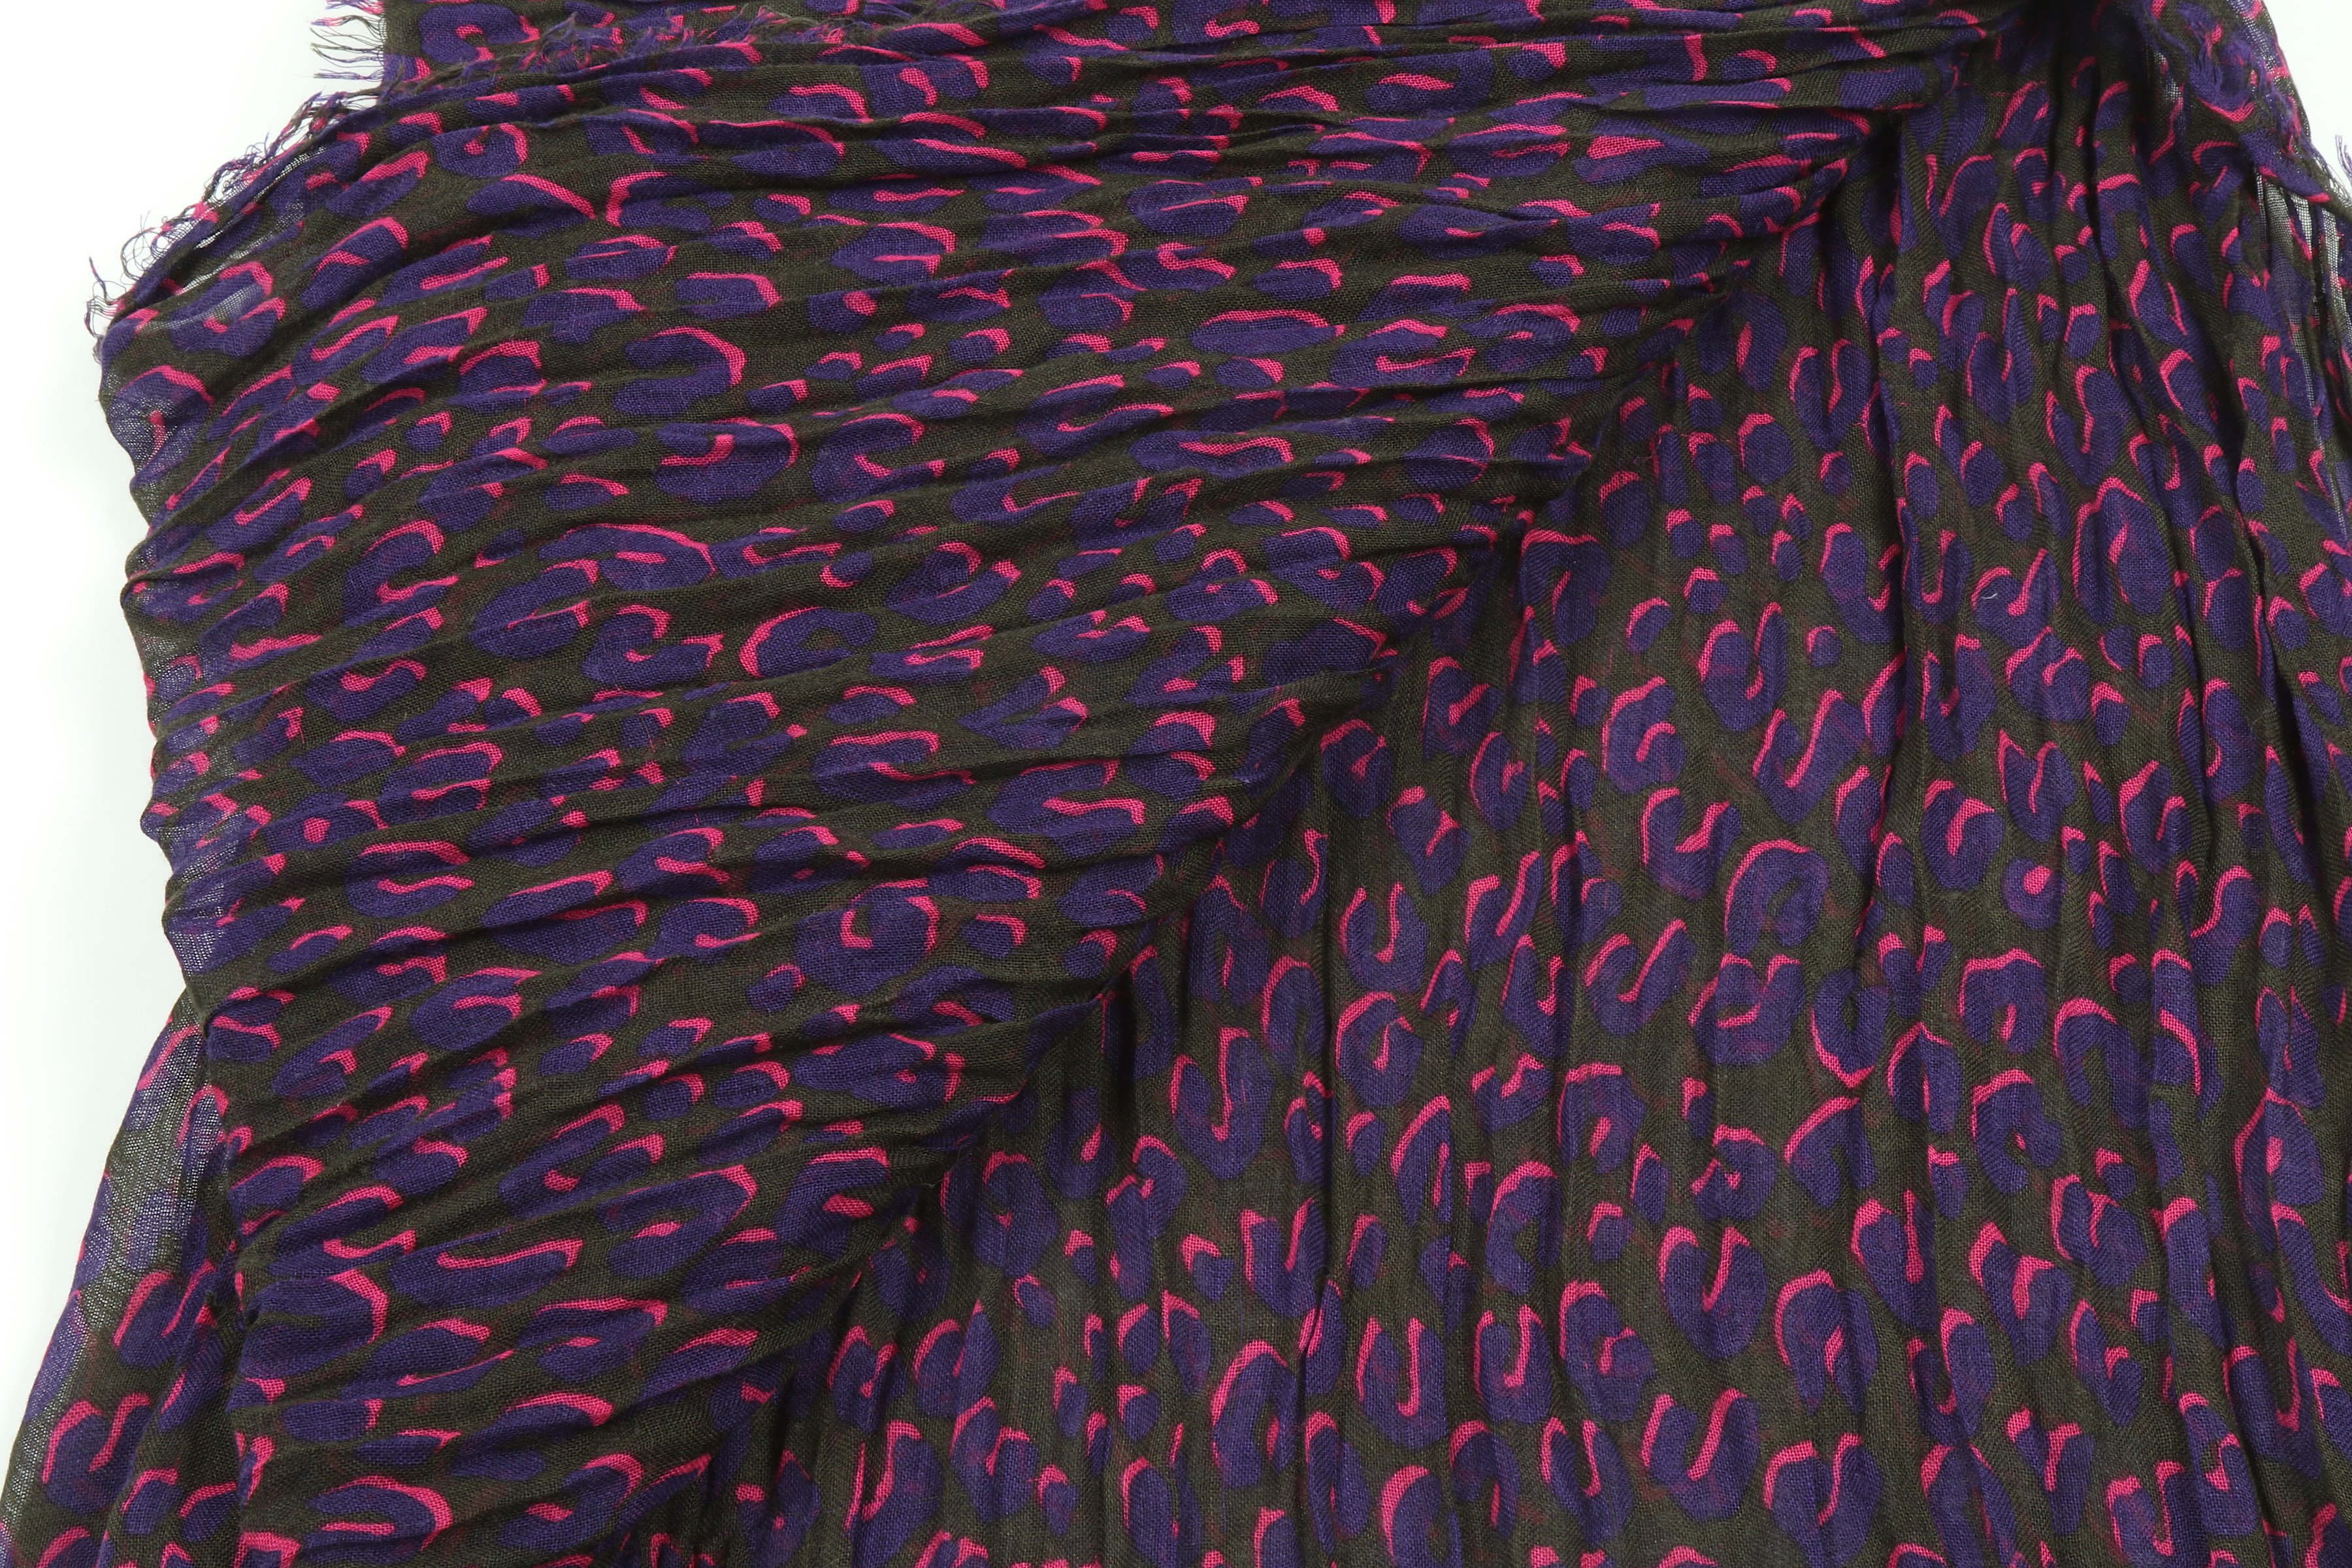 Louis Vuitton Stephen Sprouse Scarf, cashmere and silk mix with pink and purple design on black, - Image 2 of 3